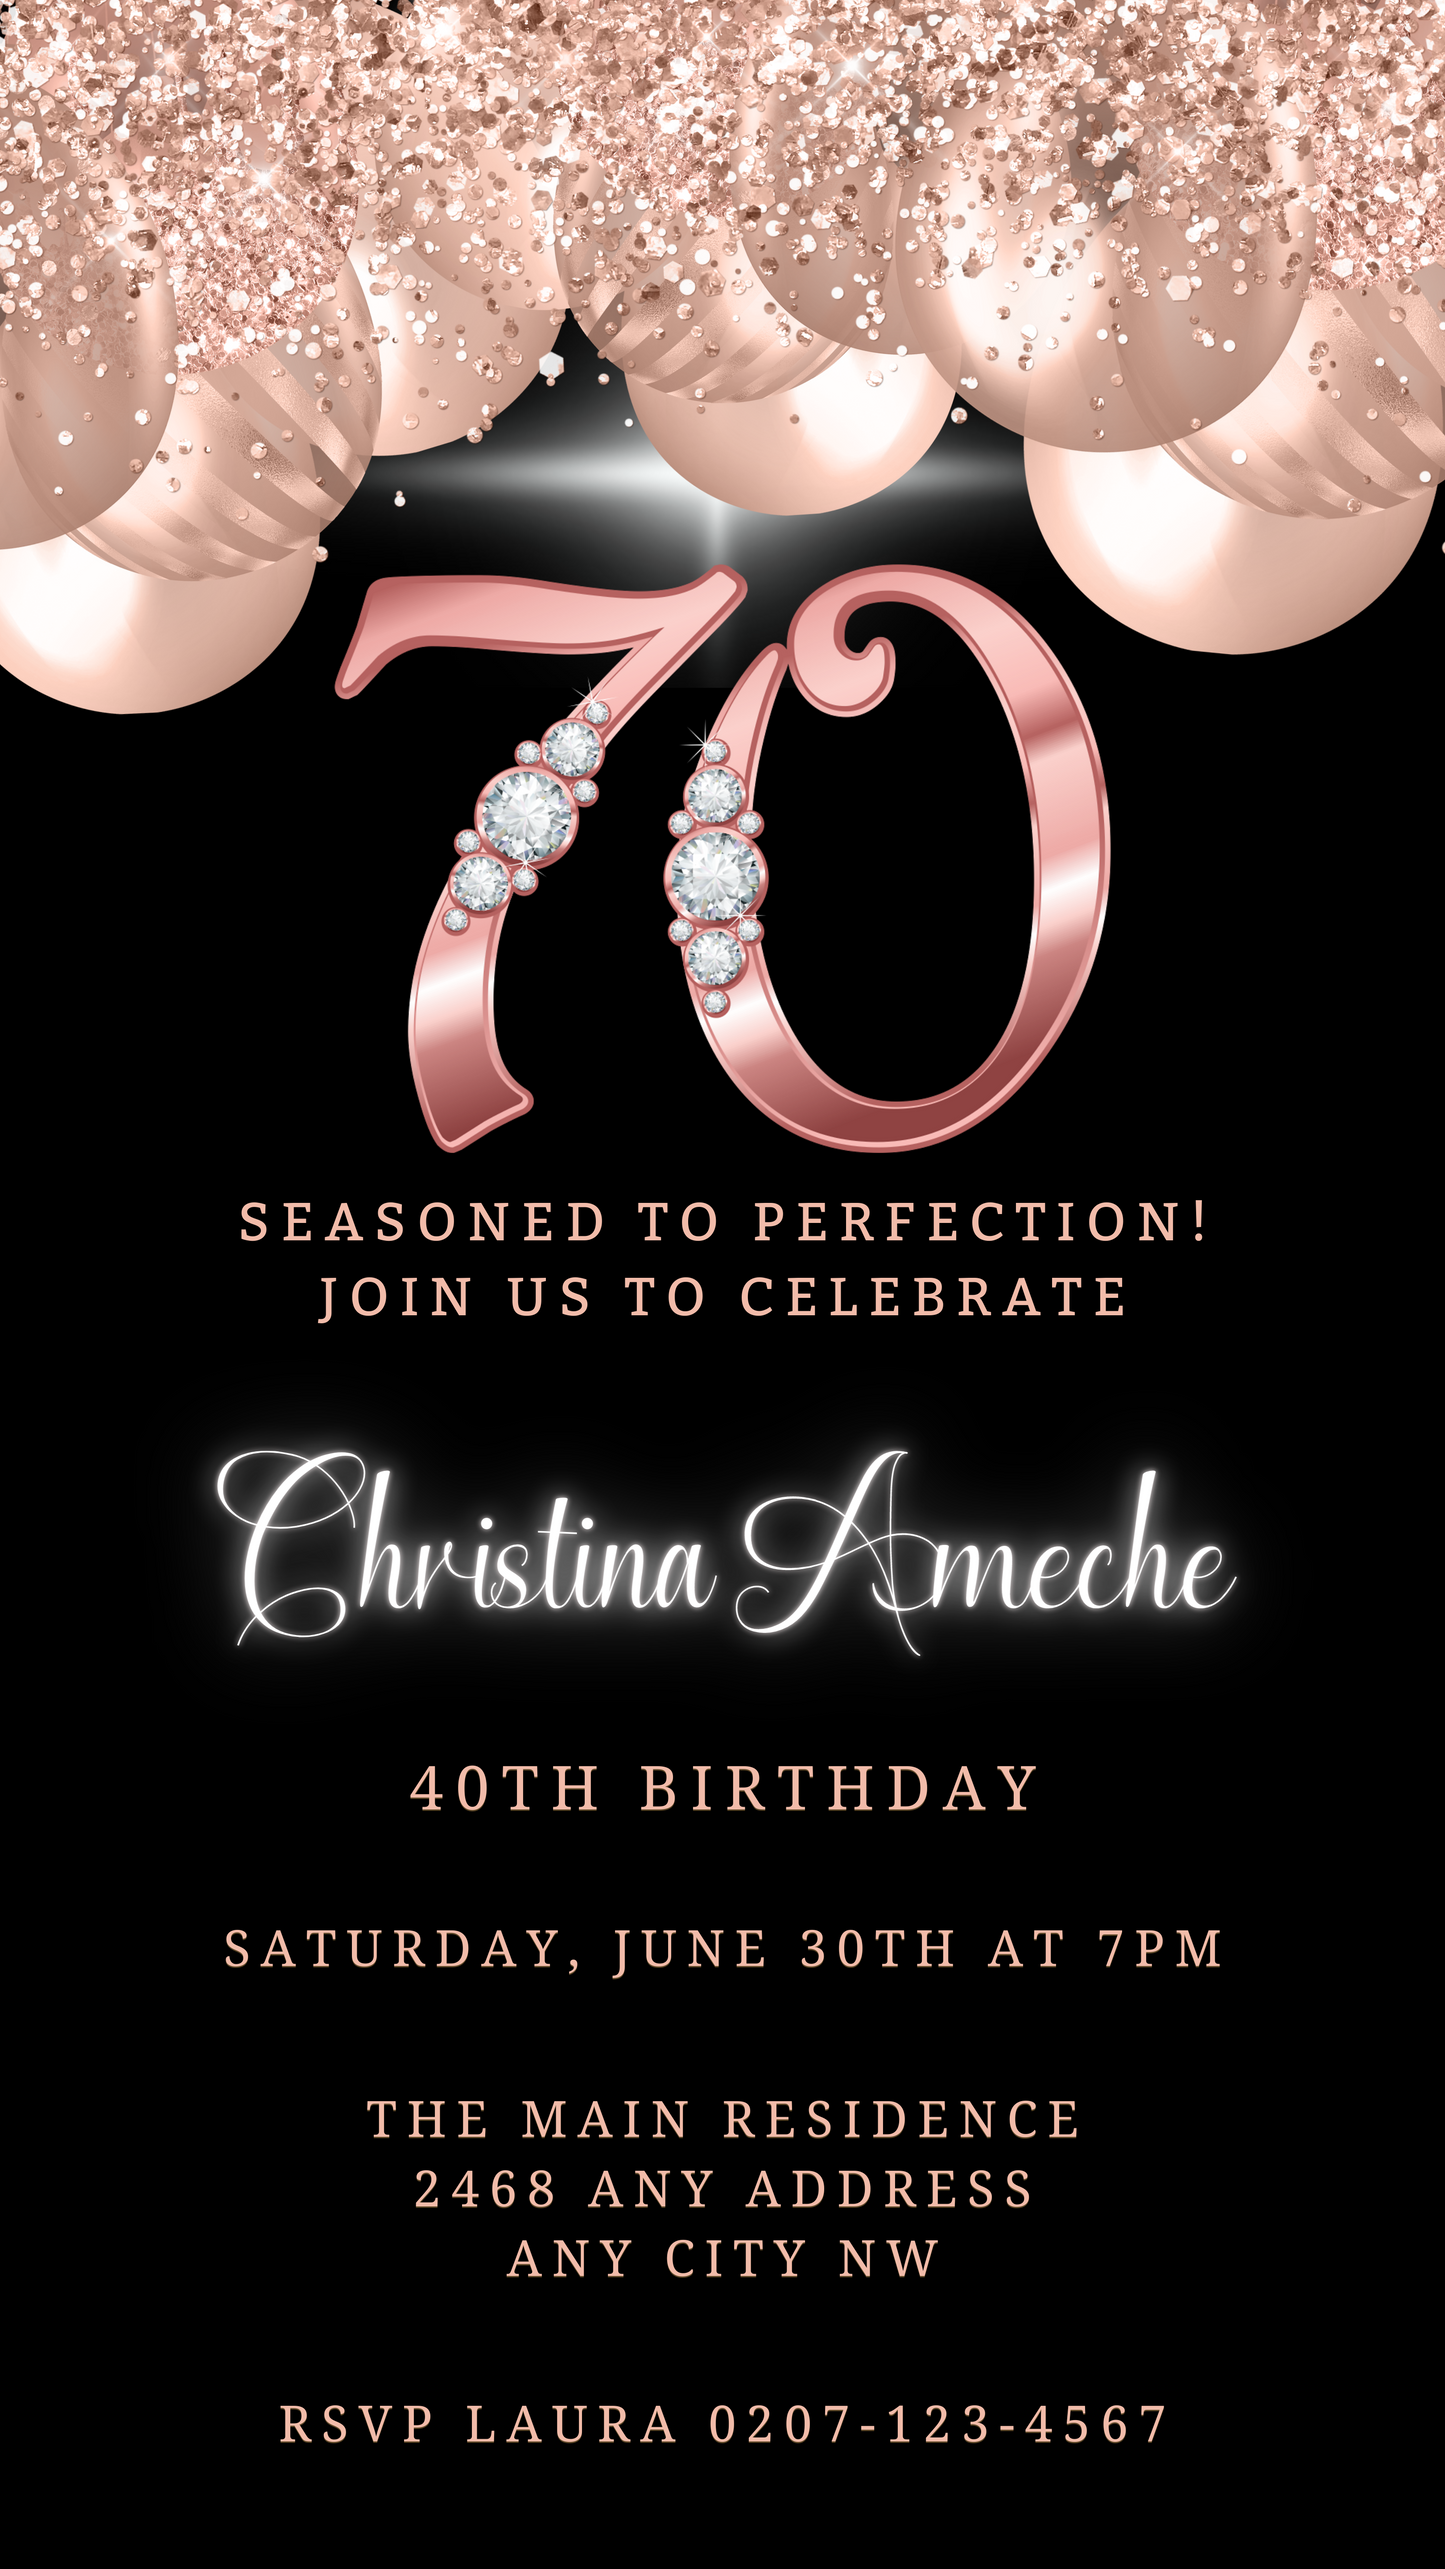 Rose Gold Balloons Diamond Studs 70th Birthday Evite featuring black and gold design with pearls, diamonds, and customizable text. Downloadable, editable digital invitation template for smartphones.